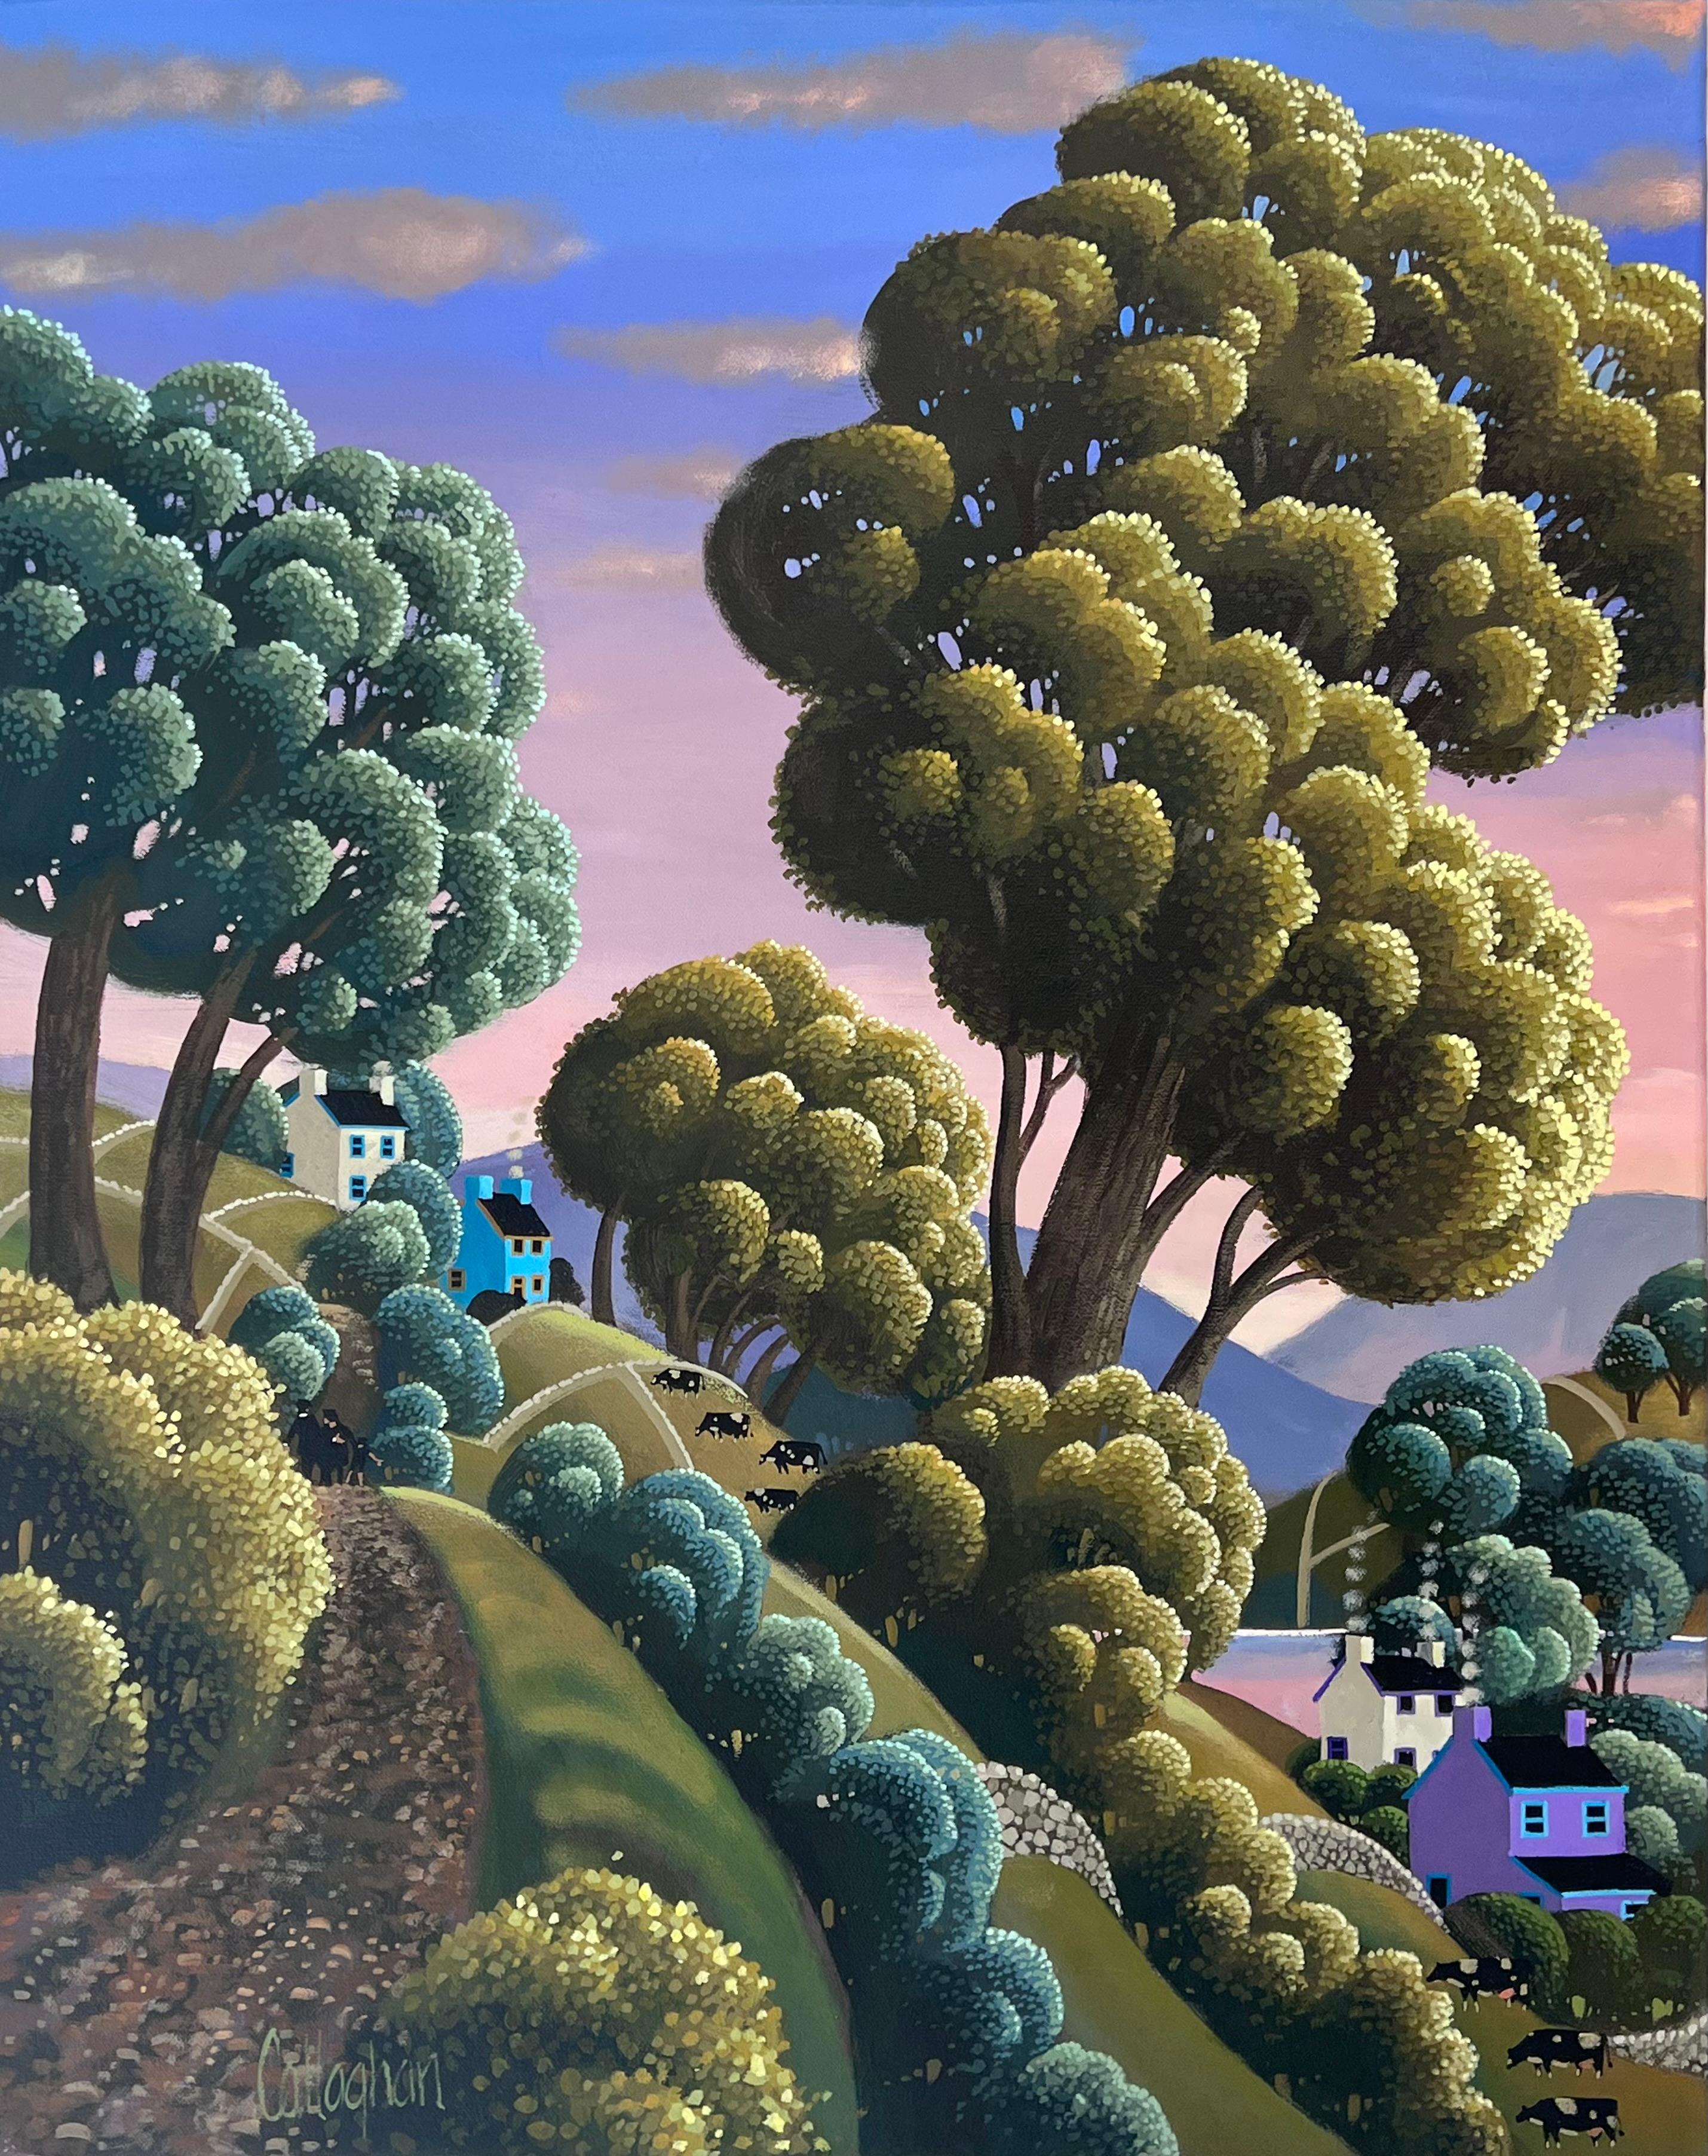  "Down to the Lake" by George Callaghan transports viewers to a serene countryside scene, where the boundary between reality and dreamscape blurs in a mesmerizing display of surrealism. In this enchanting painting, the focal points of the scene draw